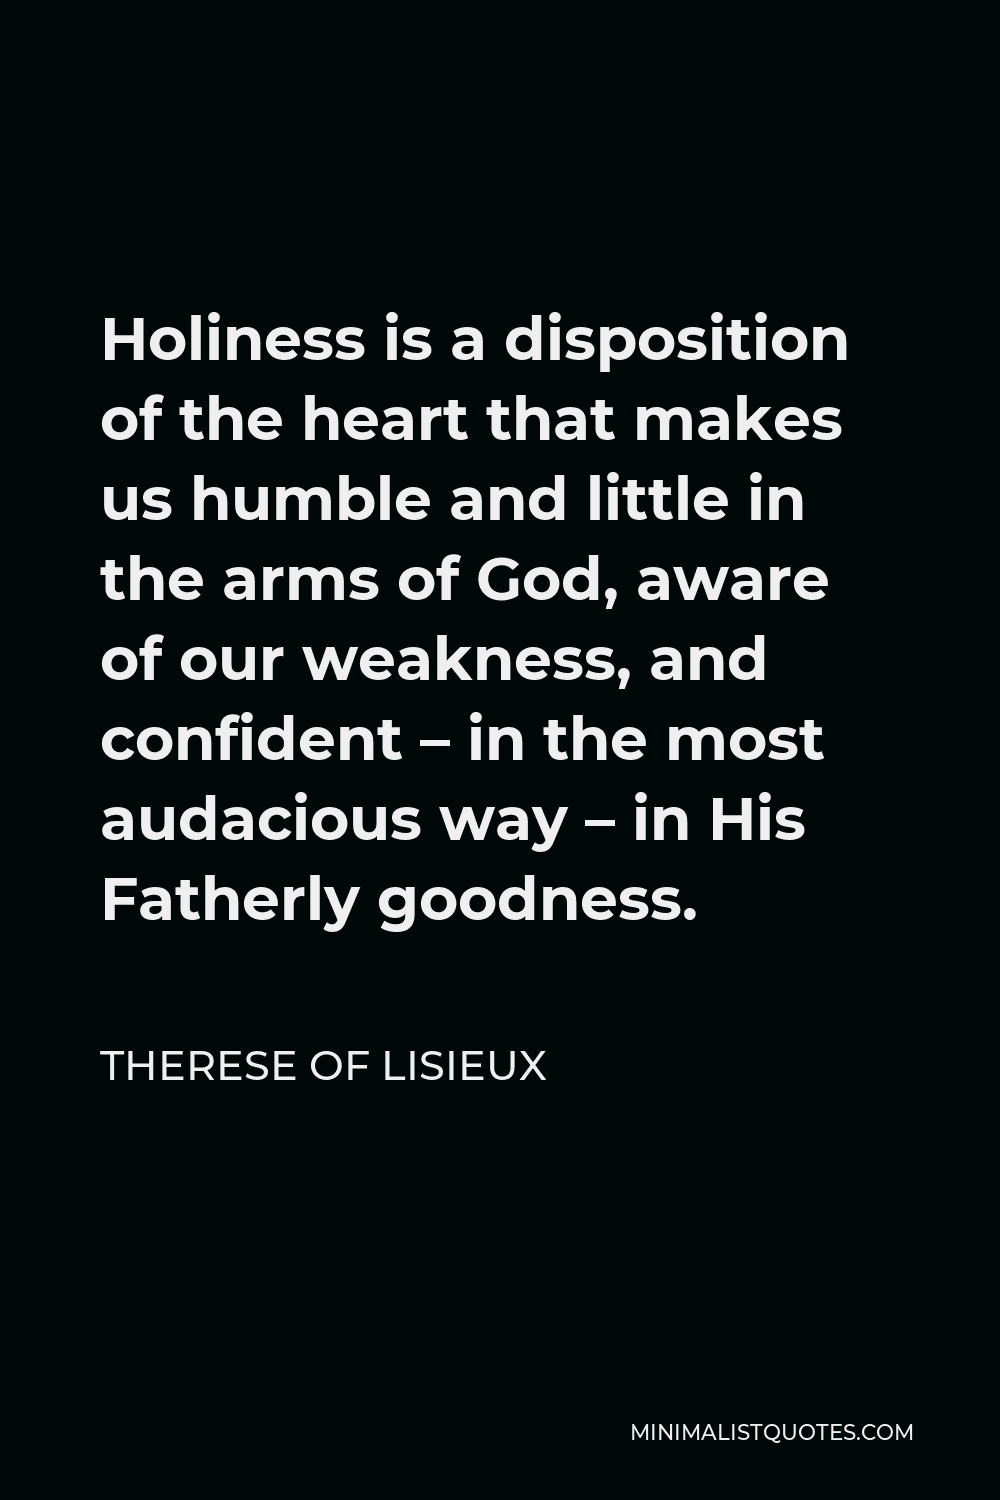 Therese of Lisieux Quote - Holiness is a disposition of the heart that makes us humble and little in the arms of God, aware of our weakness, and confident – in the most audacious way – in His Fatherly goodness.